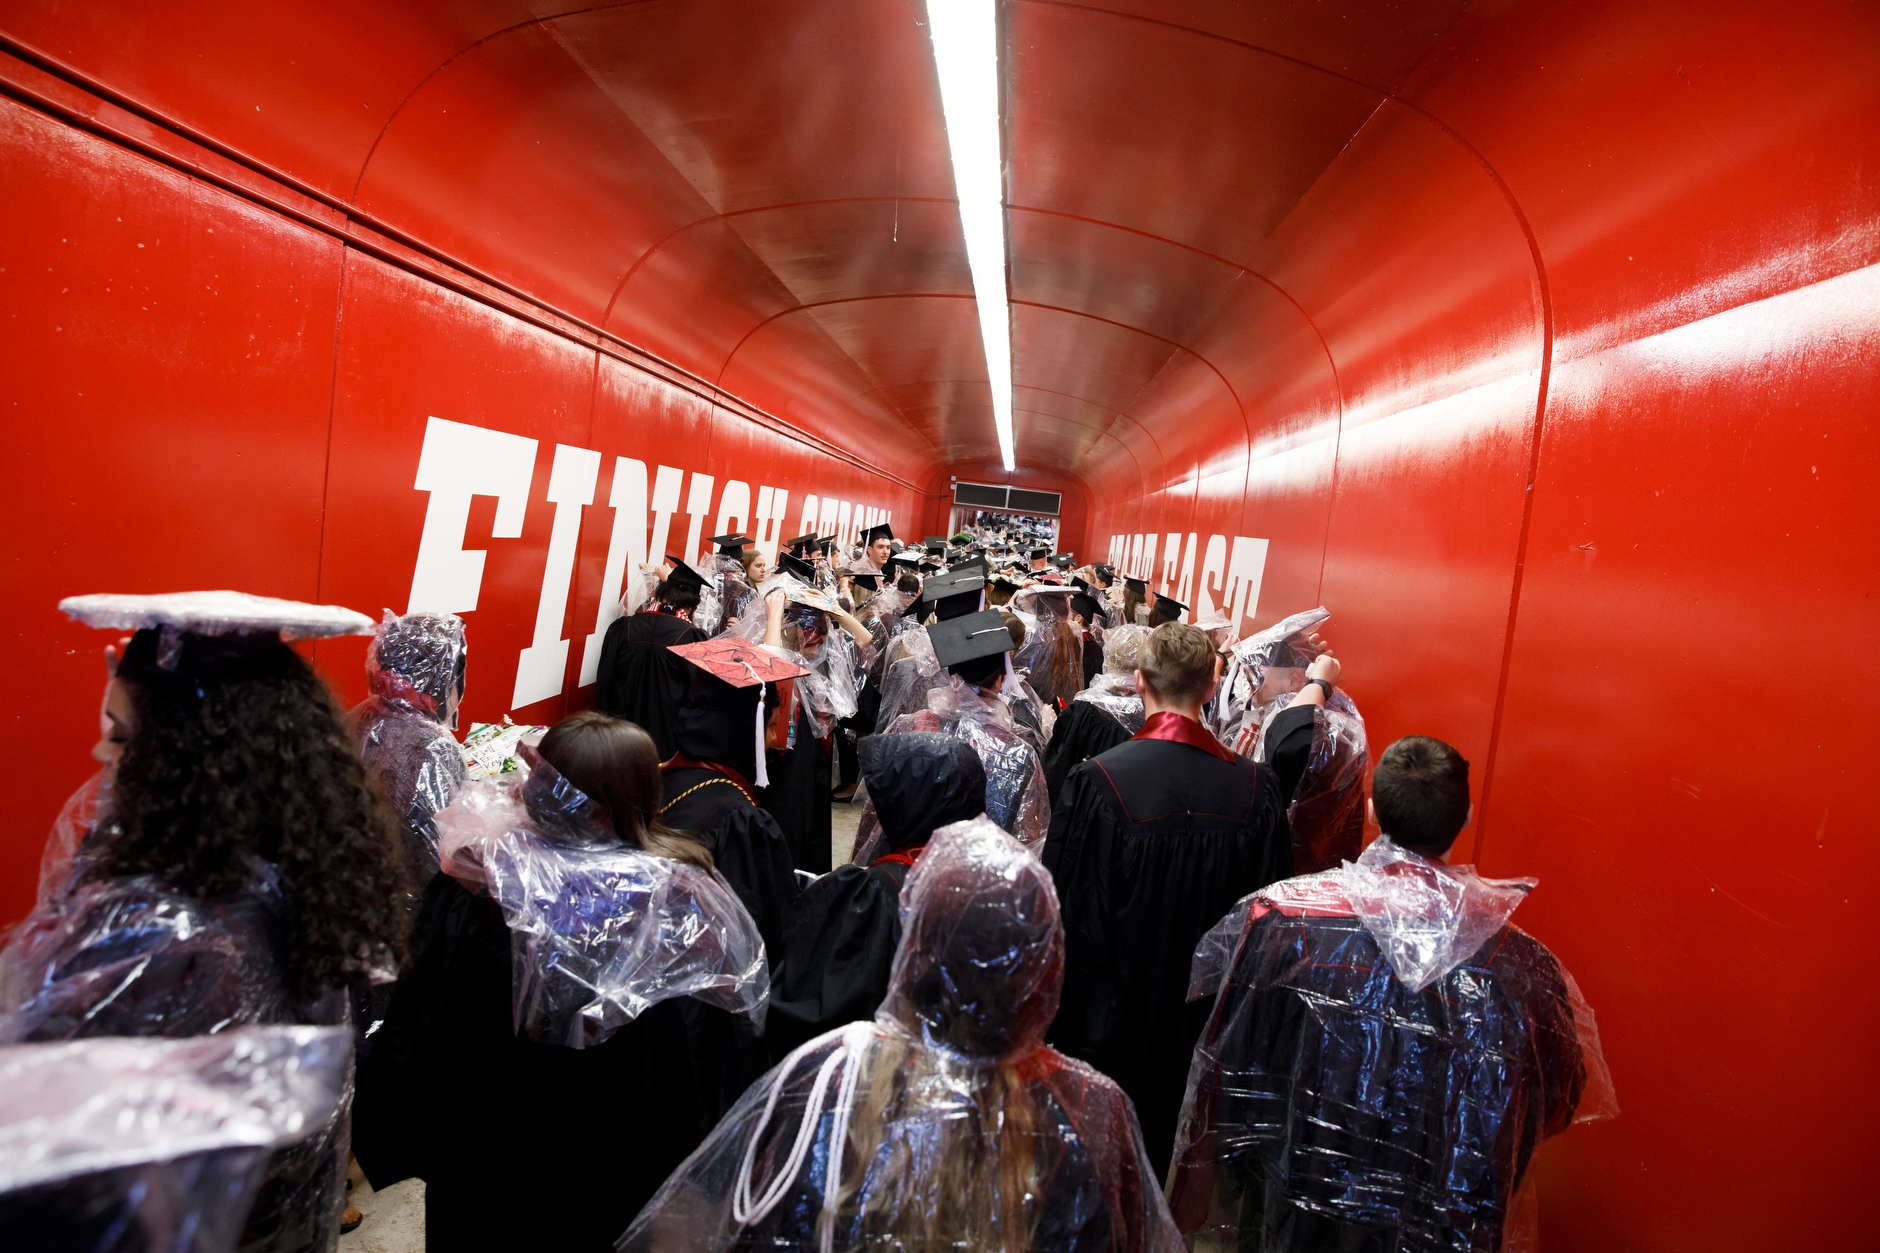 Graduates walk in the processional for the Indiana University Bloomington Undergraduate Commencement at Memorial Stadium on Saturday, May 4, 2019. (James Brosher/Indiana University)